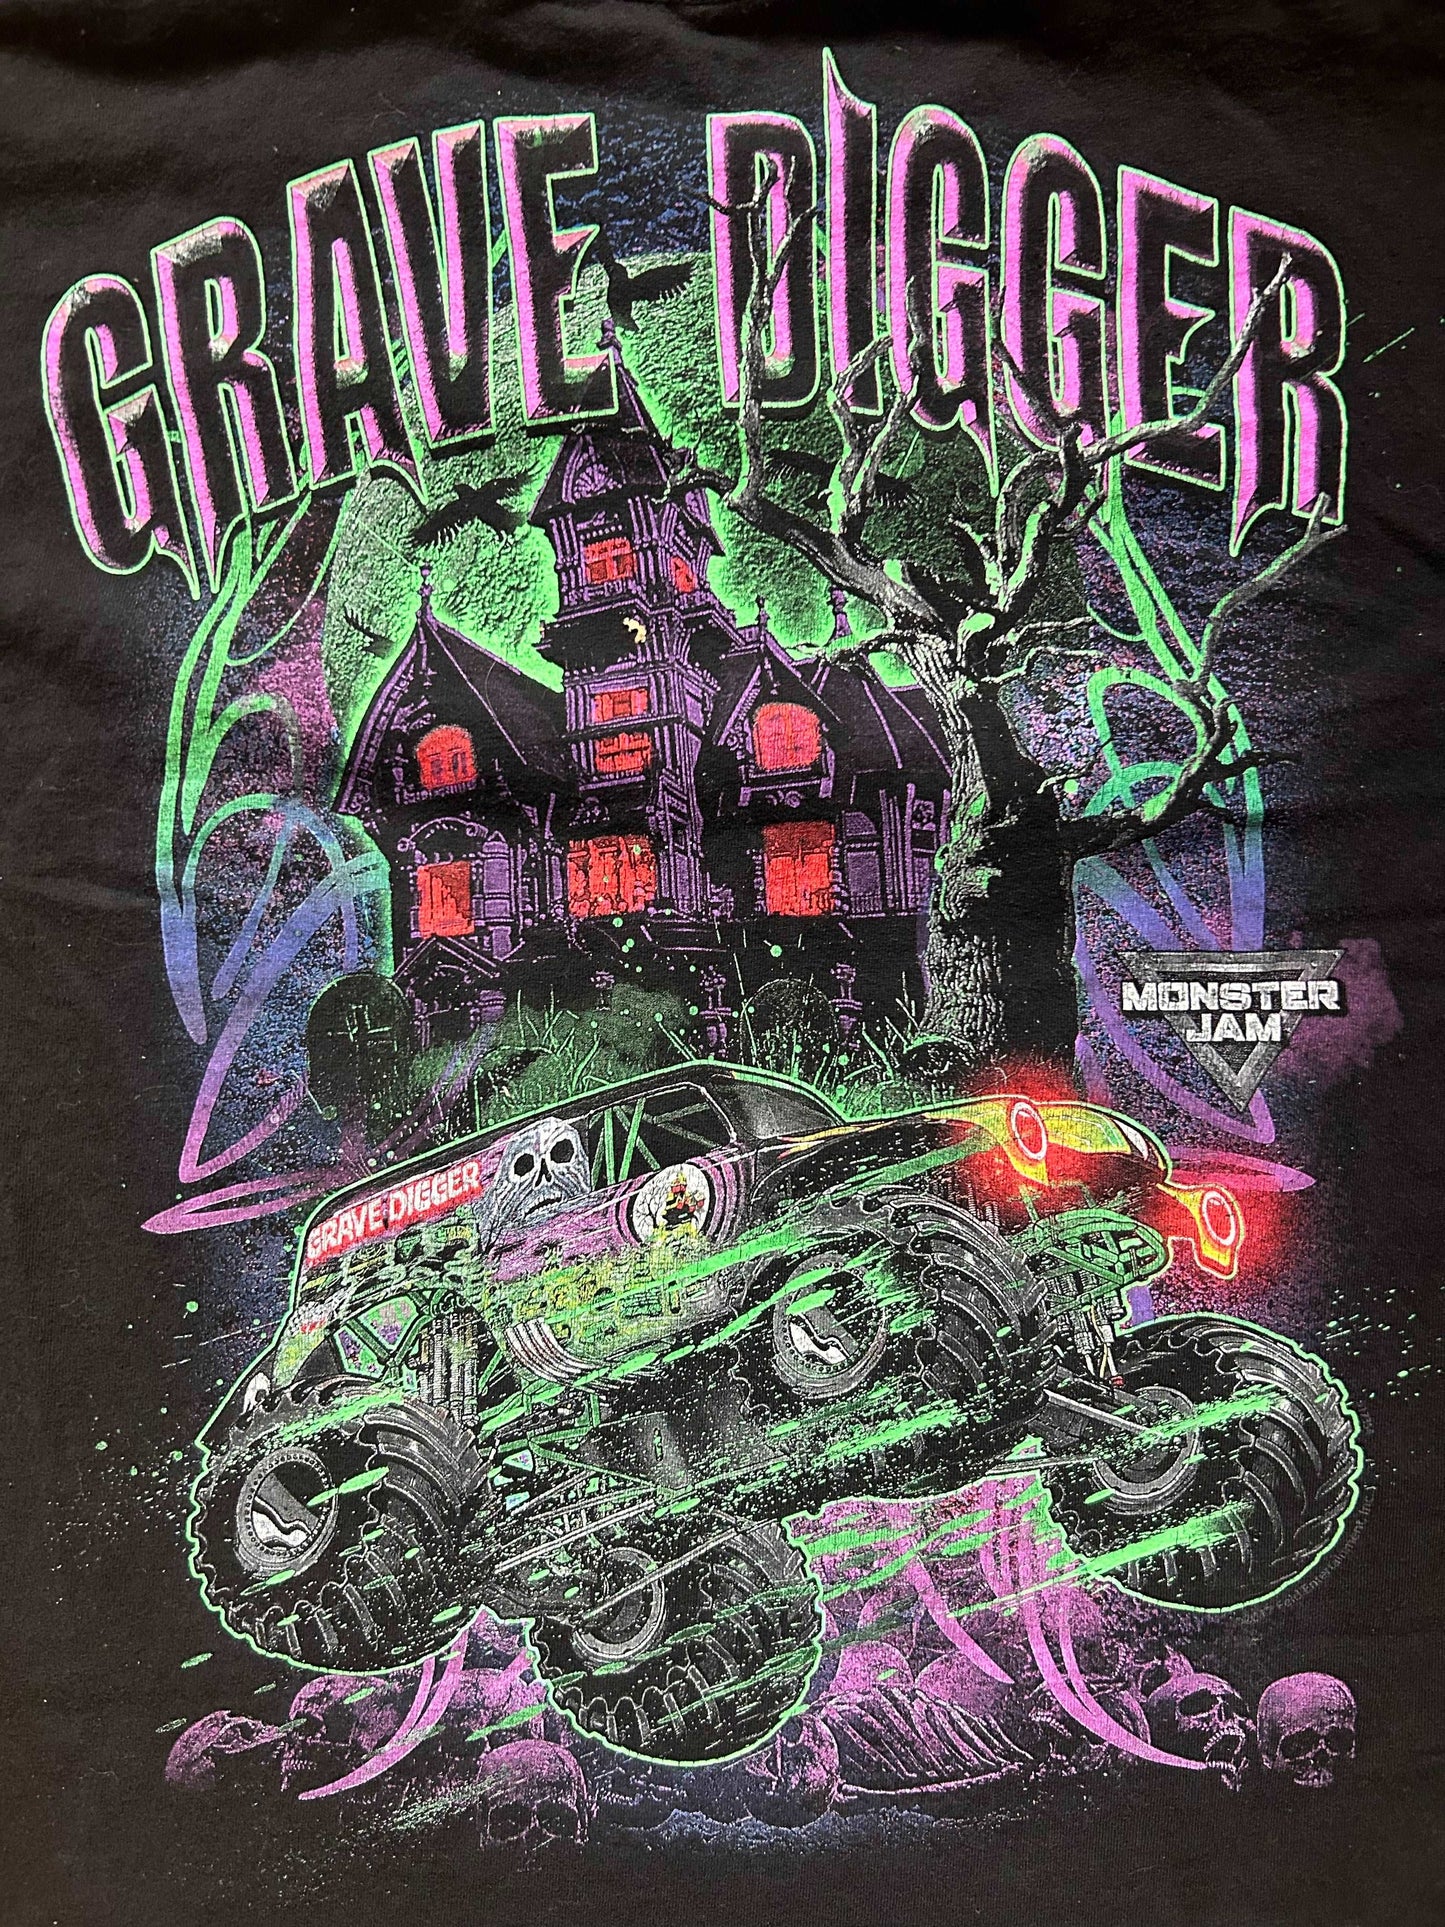 1988 Grave Digger Tee